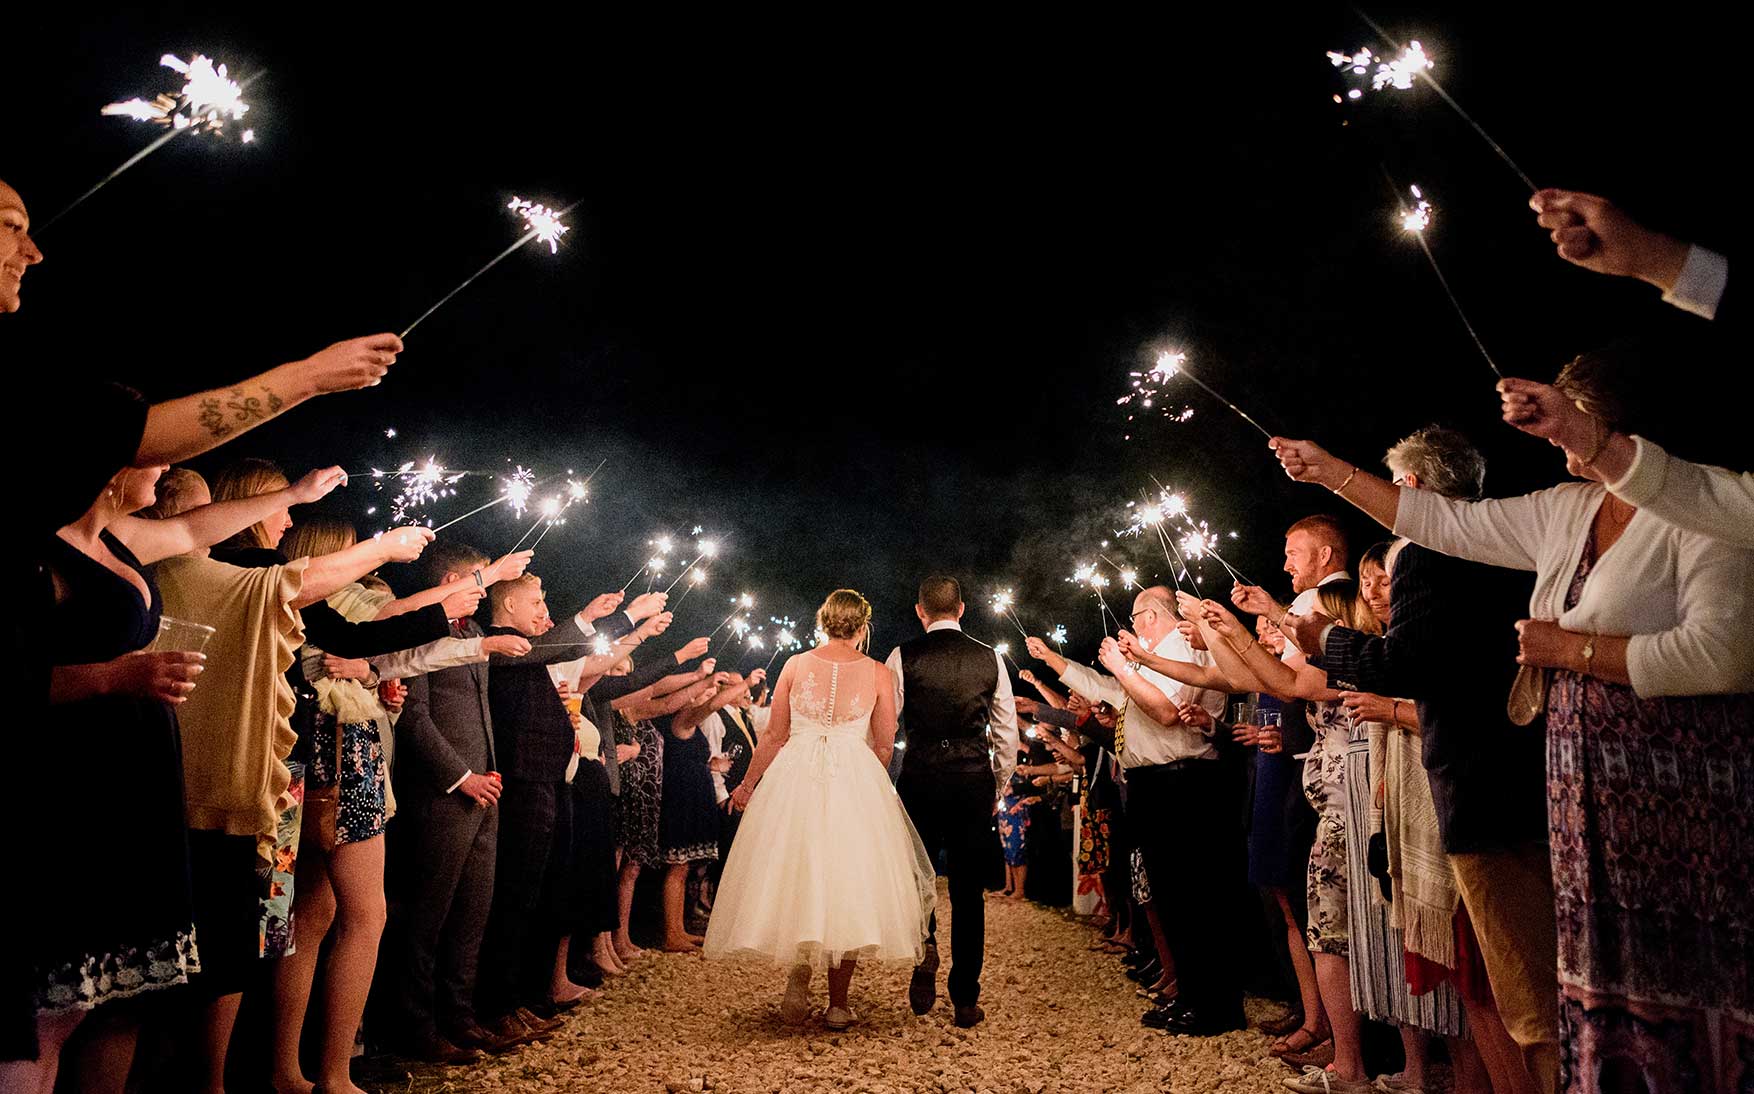 Guests hole up sparklers to salute the happy couple